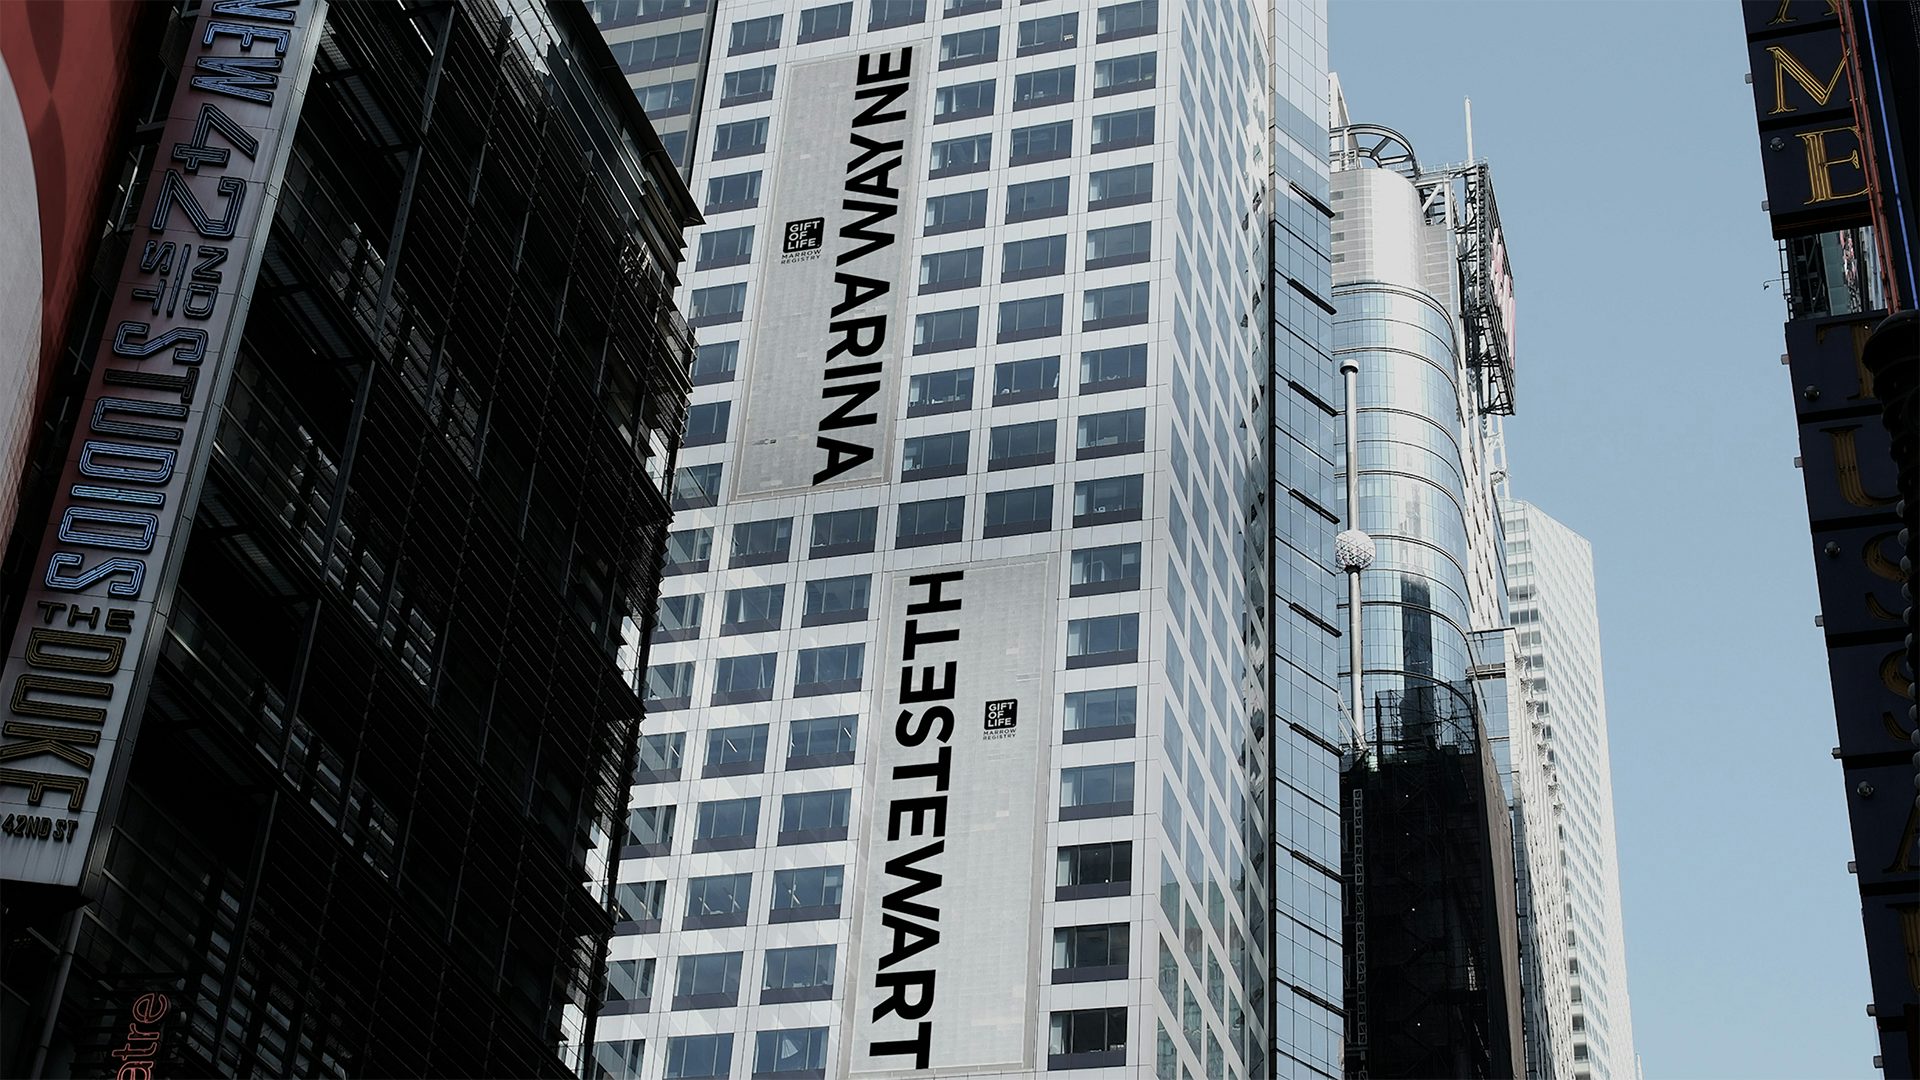 Photograph of large outdoor posters attached to a skyscraper, which feature the names Marina and Wayne, and Seth and Stewart